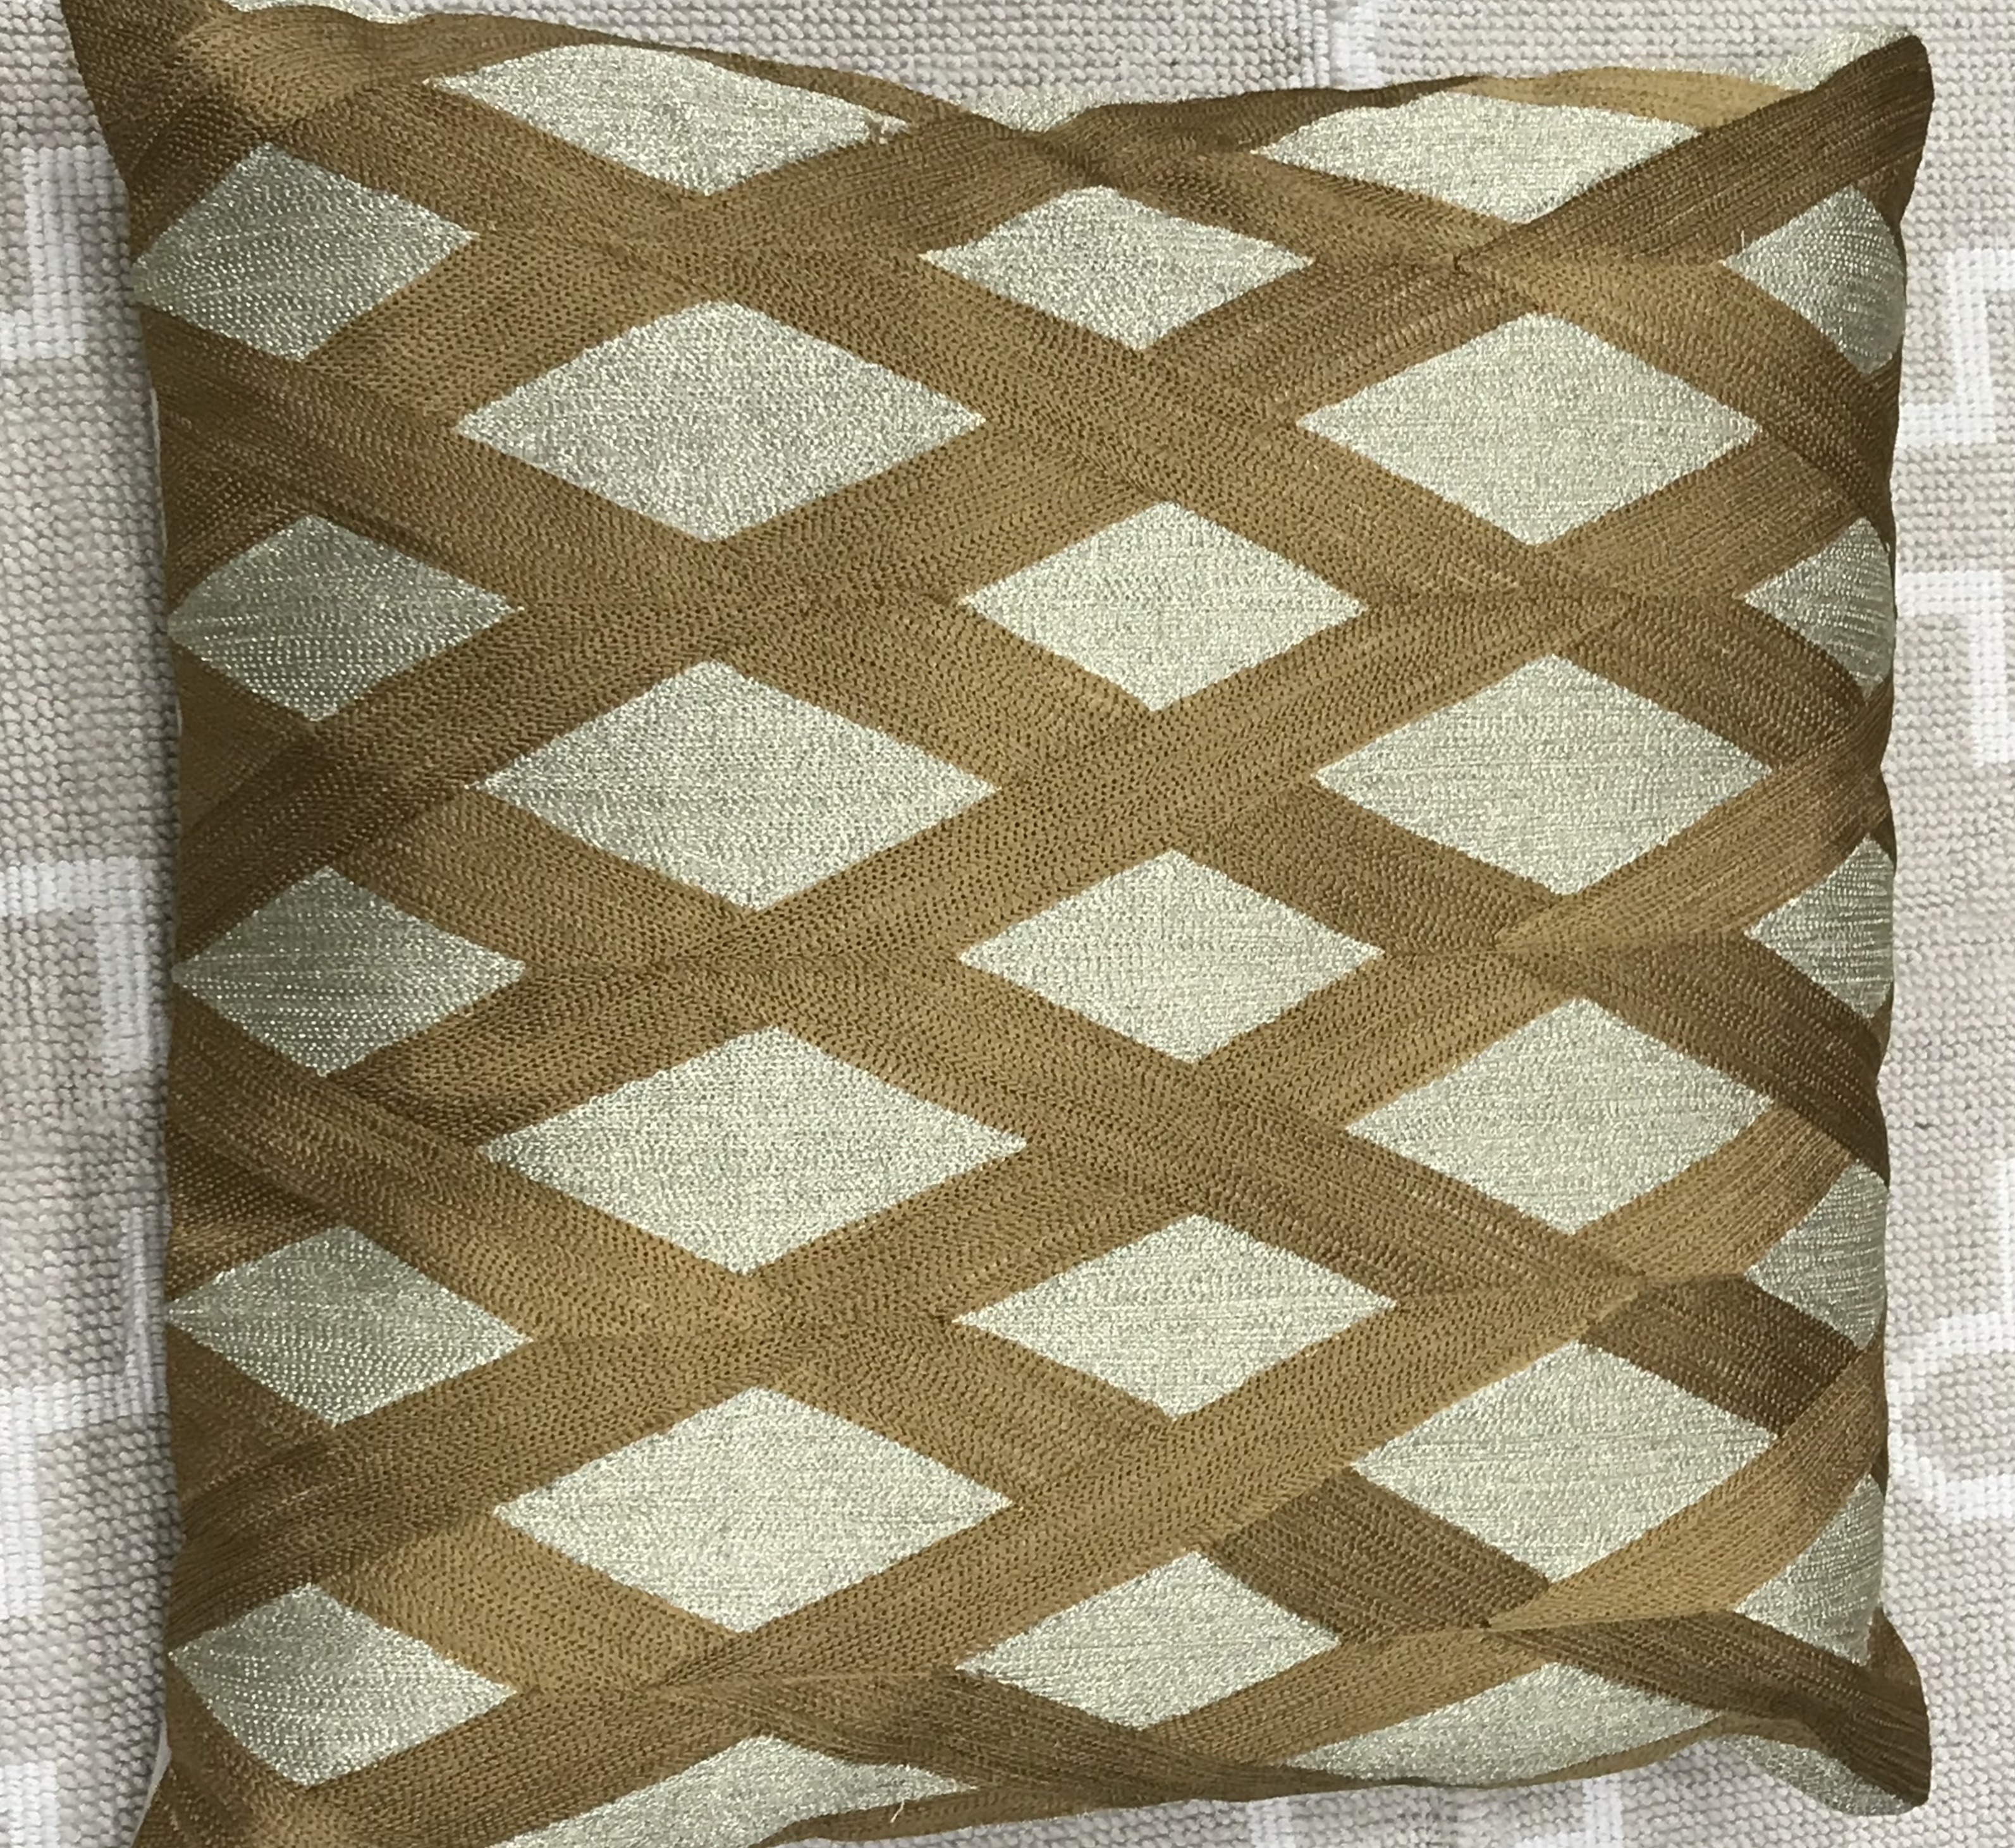 Embroidered light and bold gold cushion cover